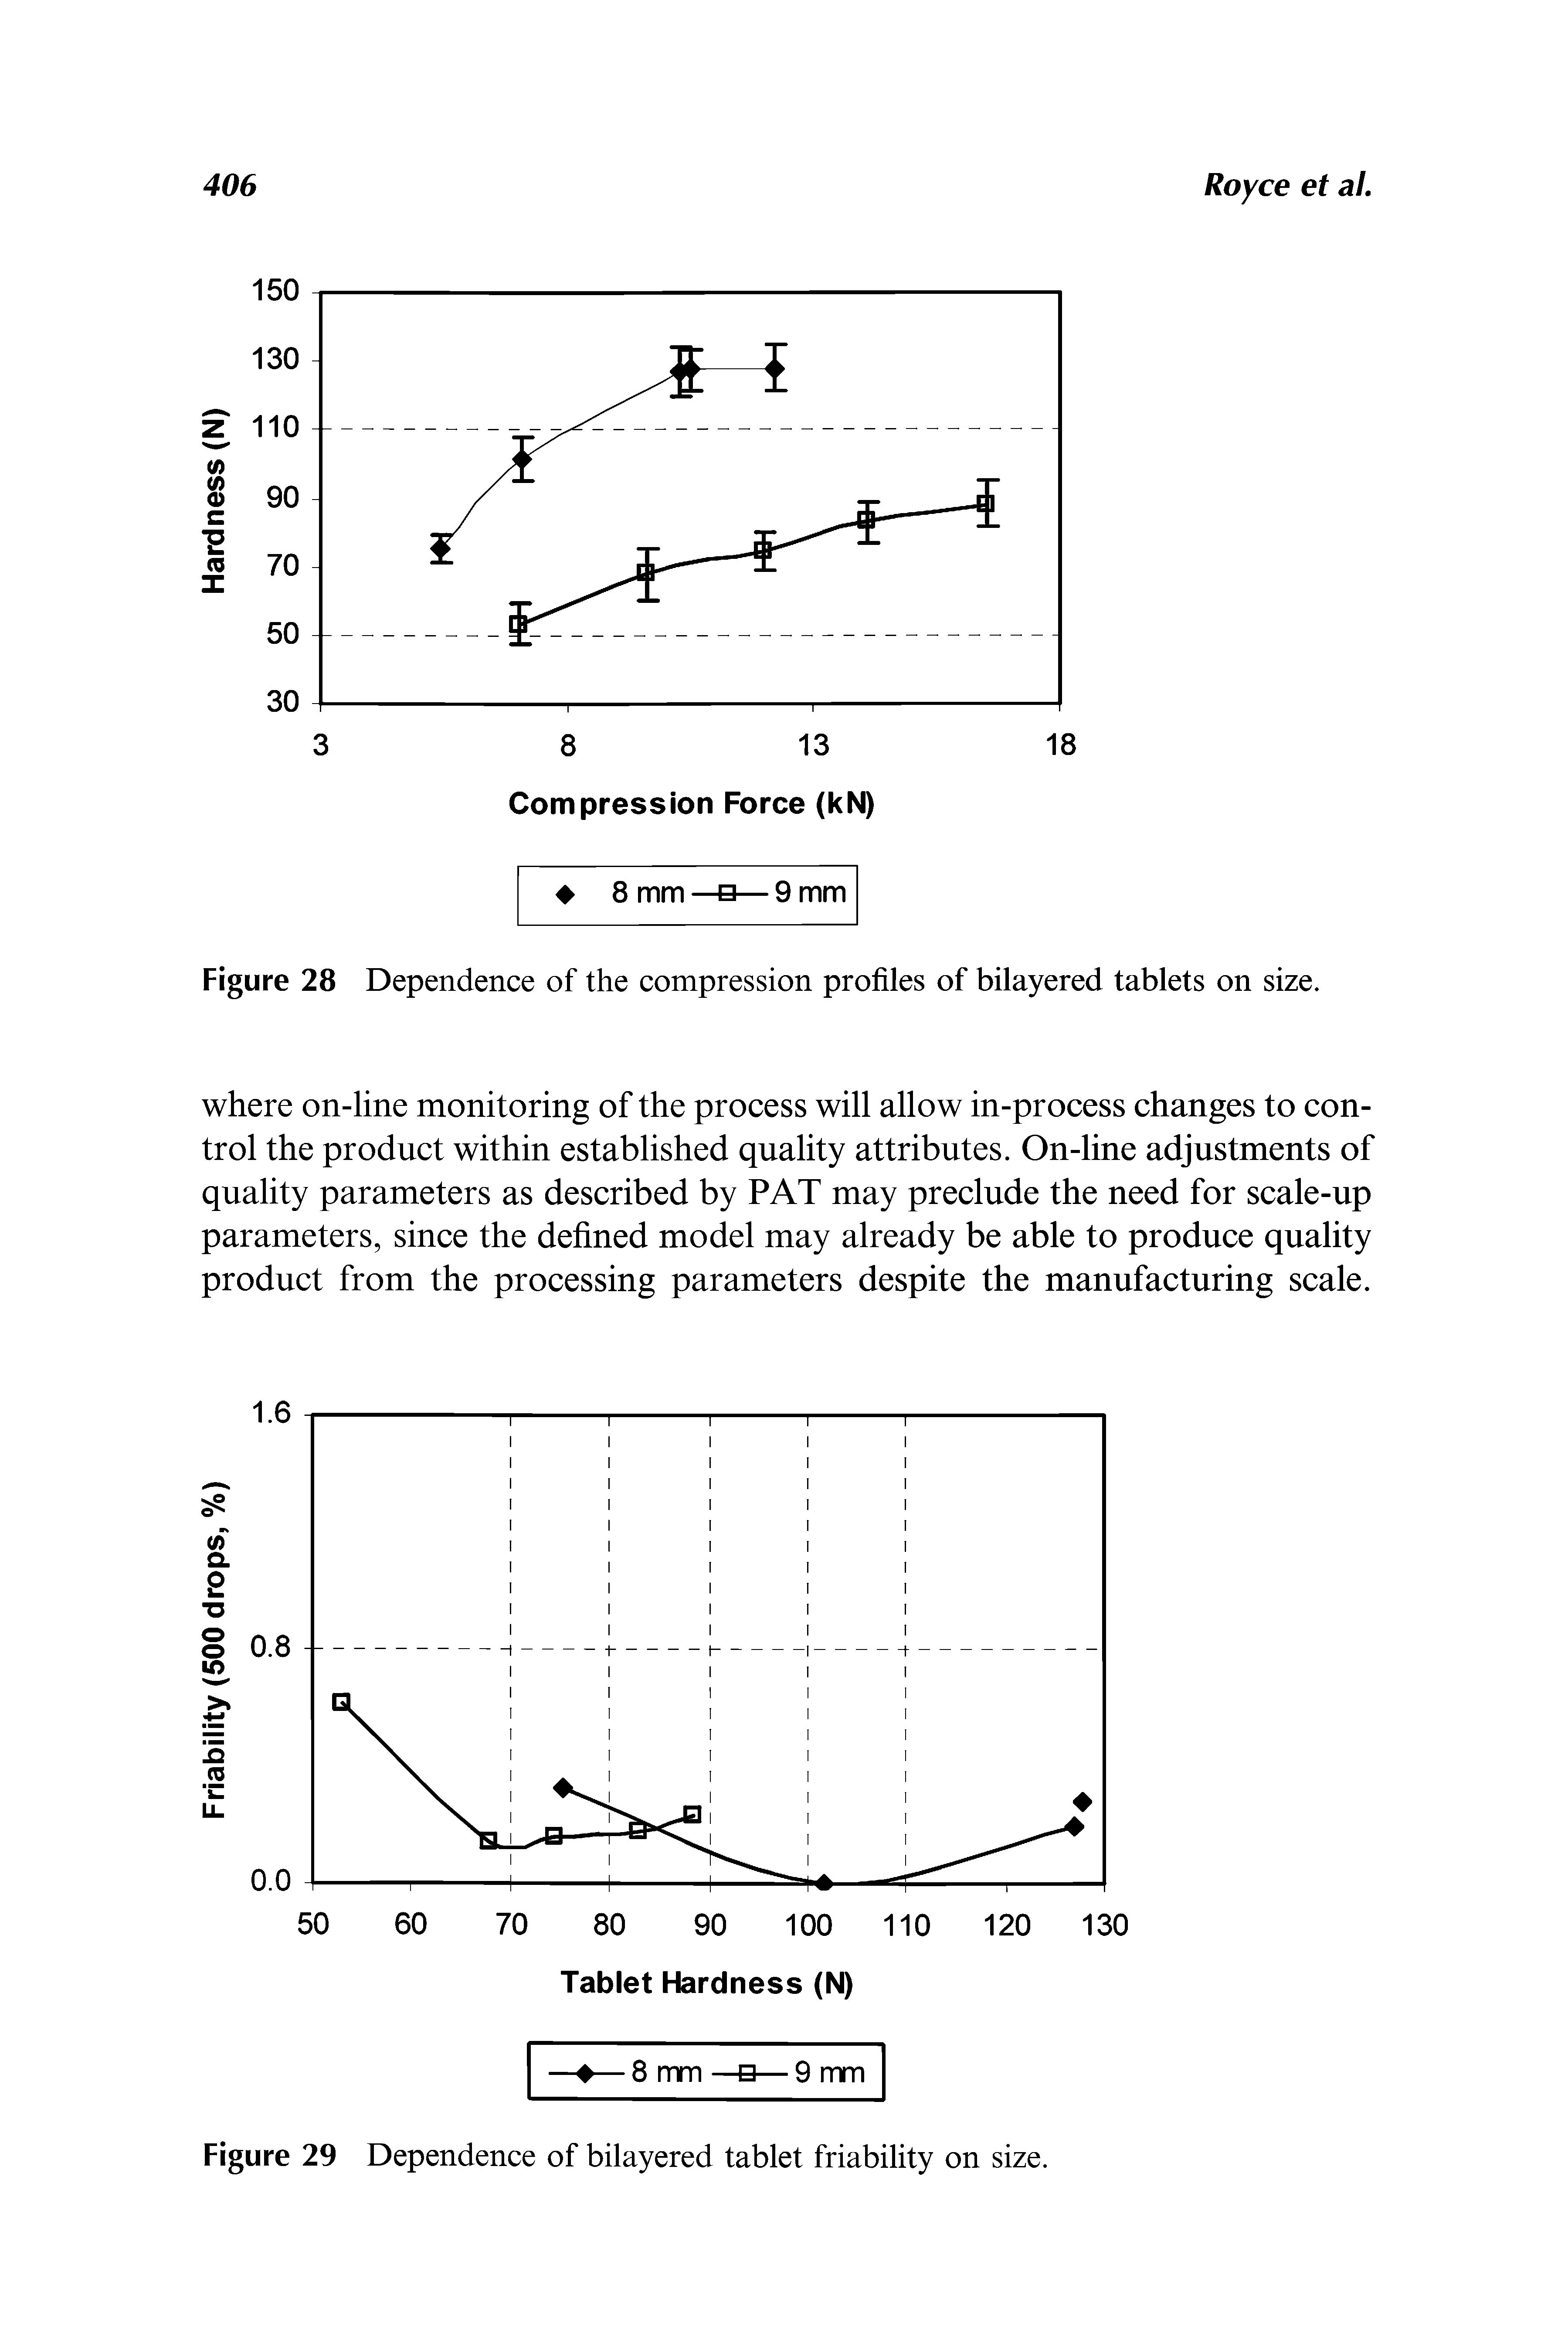 Figure 28 Dependence of the compression profiles of bilayered tablets on size.